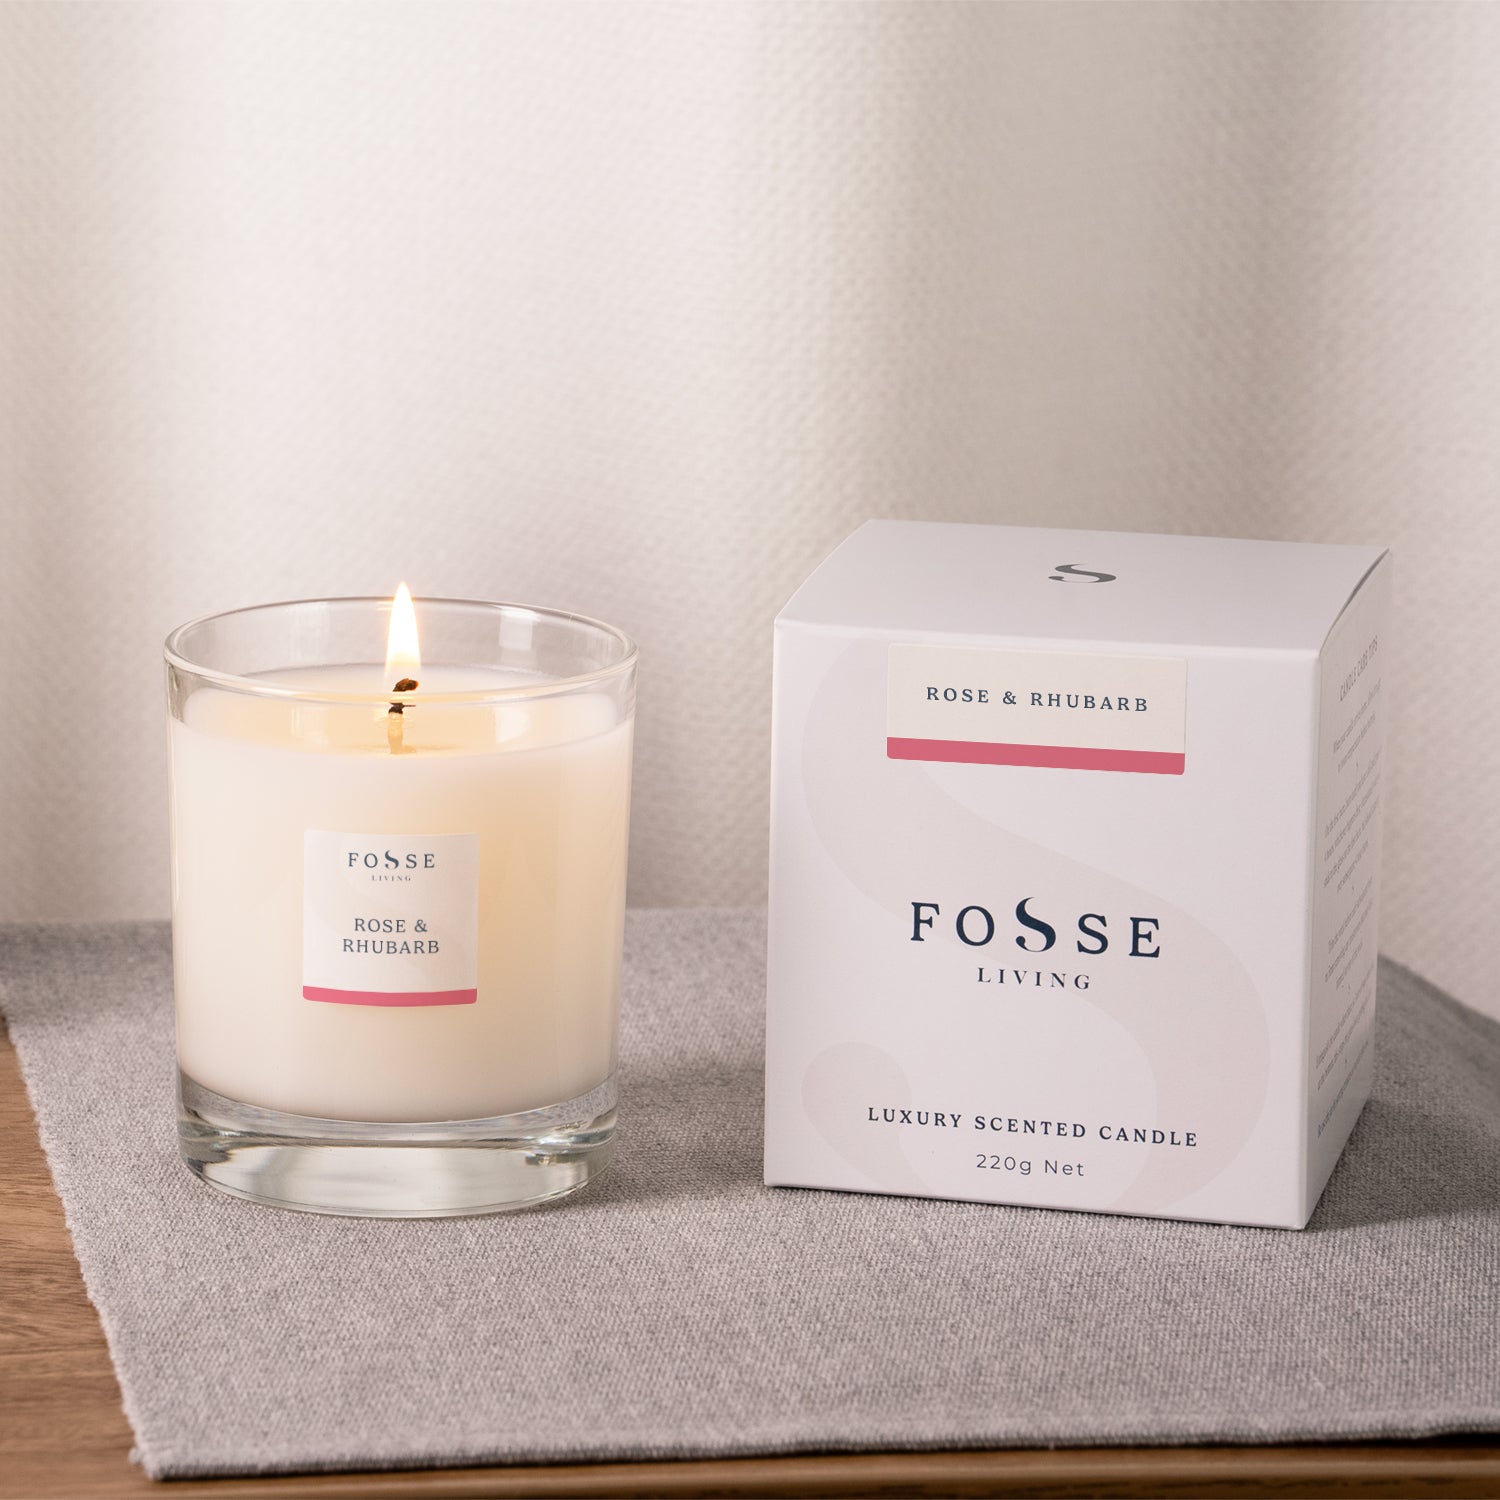 Rose & Rhubarb Scented Candle - Fosse Living | Luxury Home Fragrances